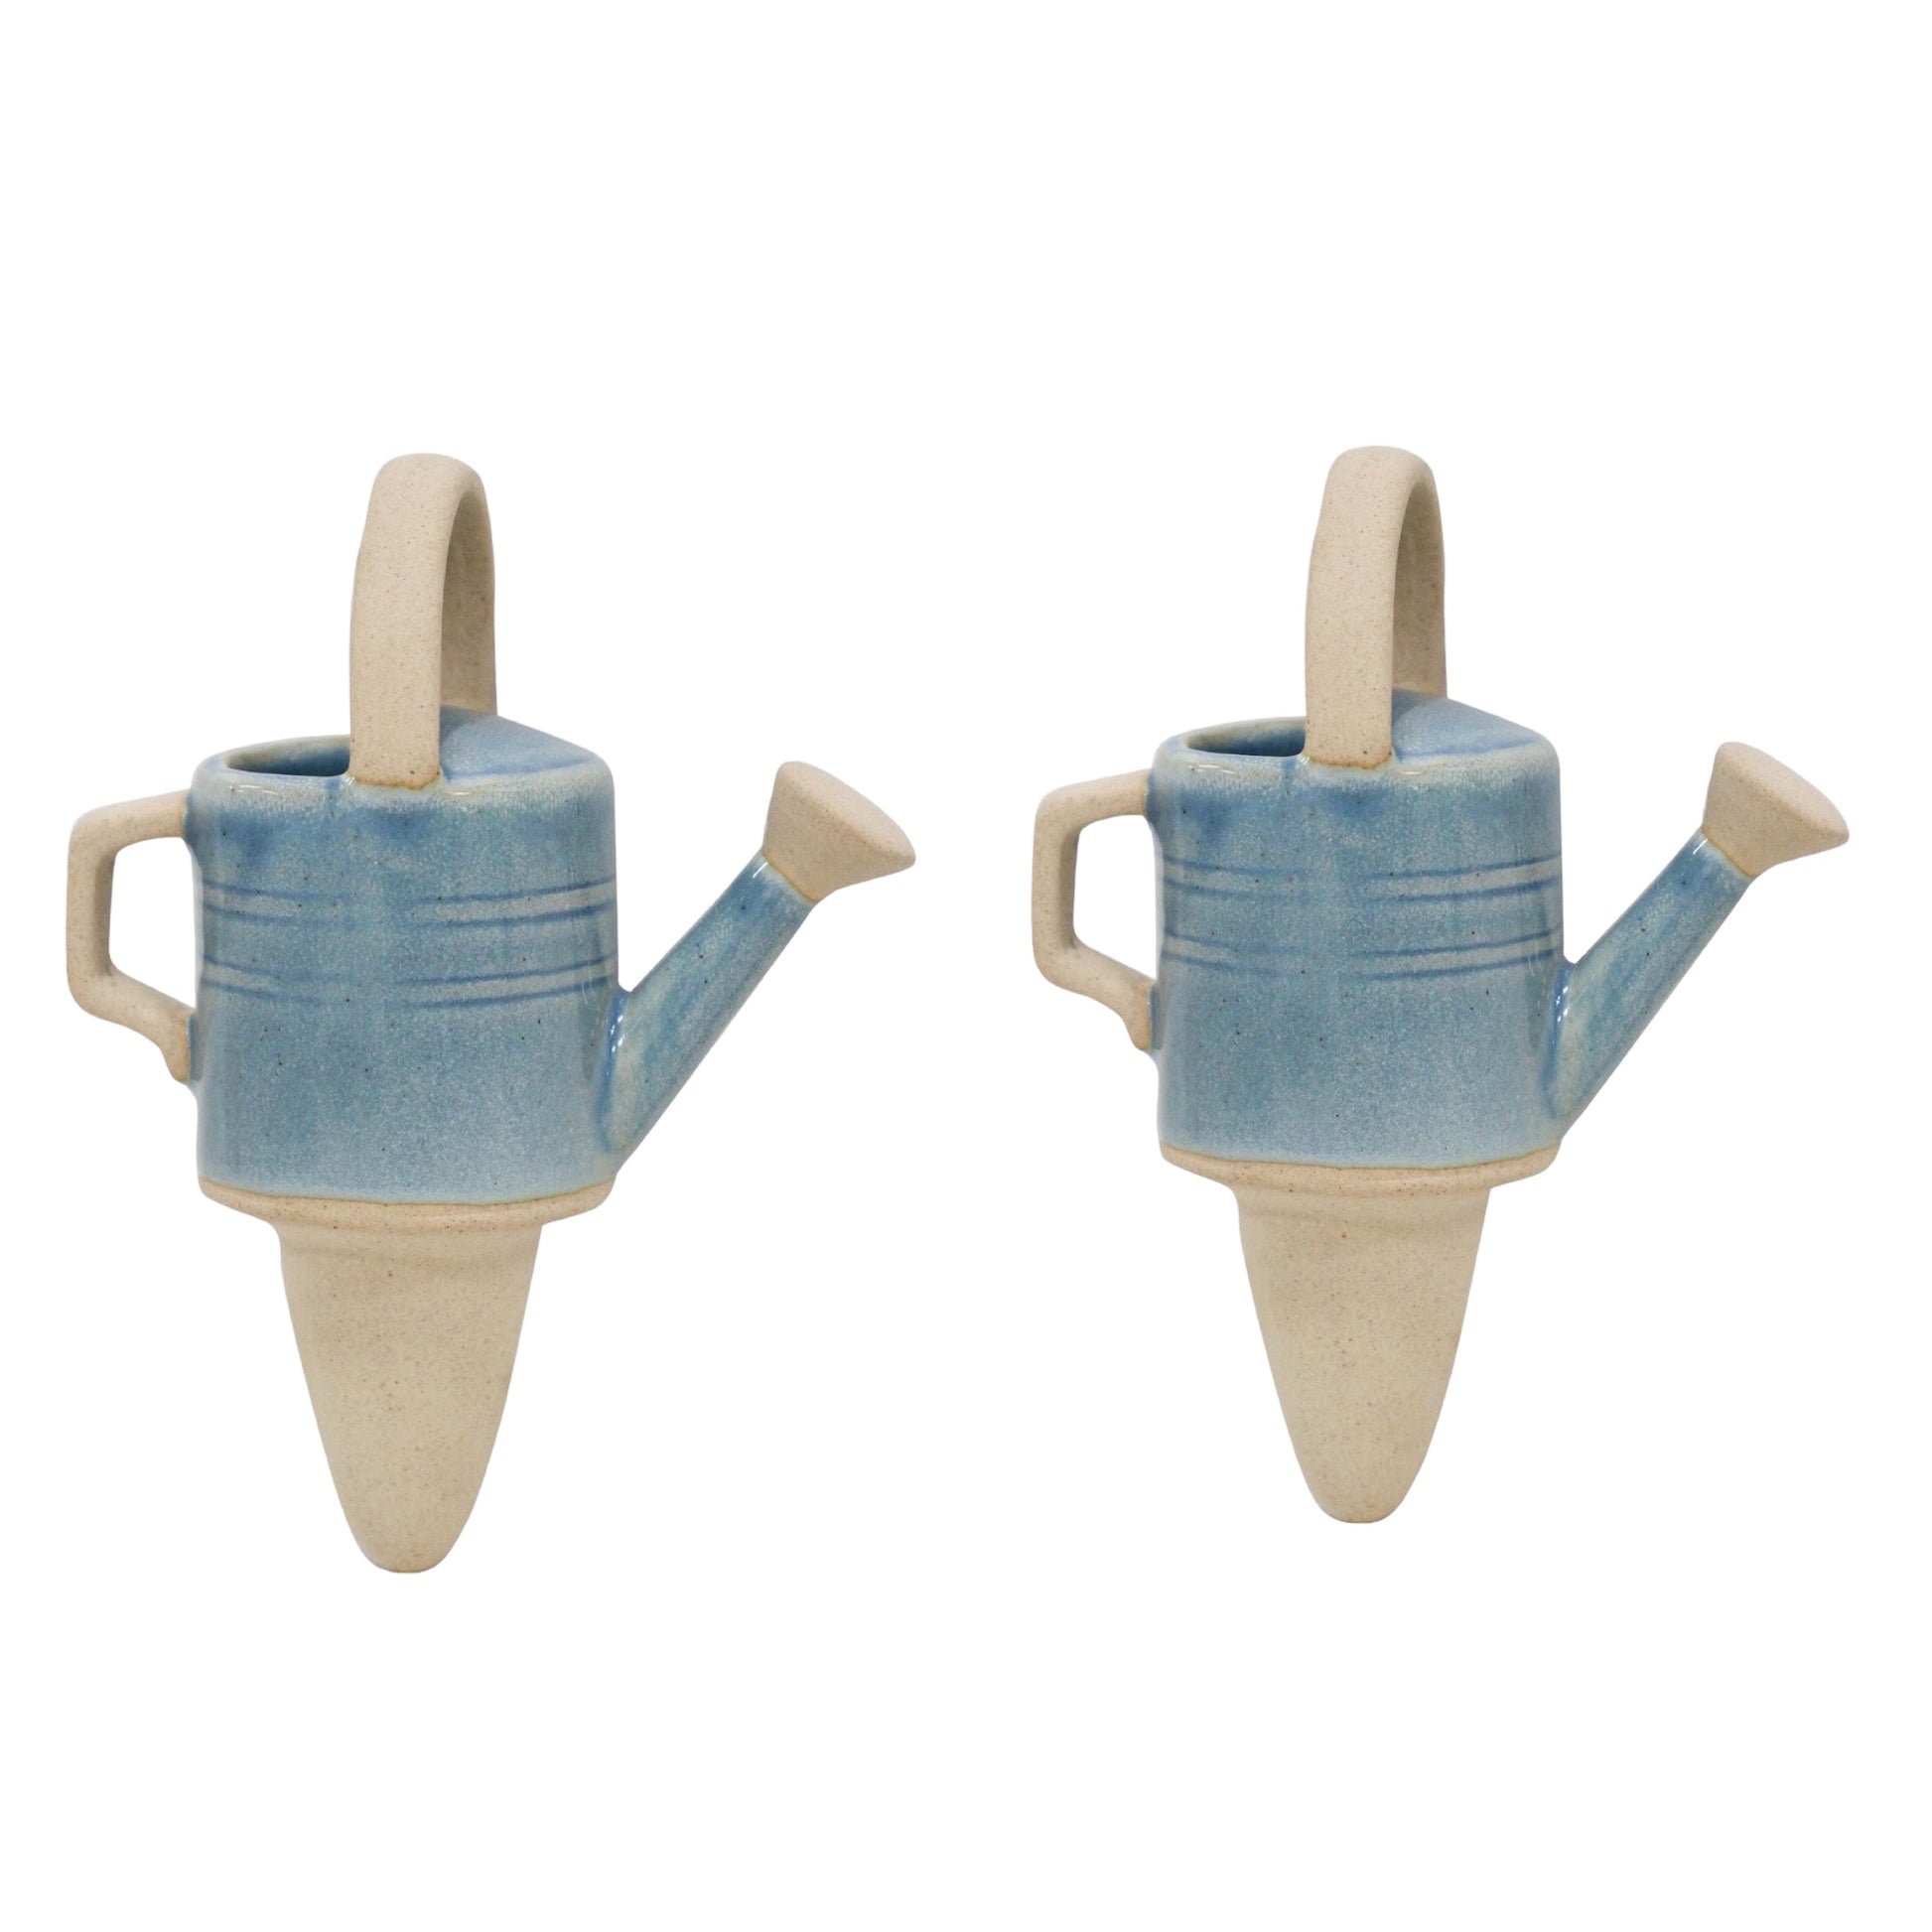 Water Spike Watering Can Set of 2 - The Renmy Store Homewares & Gifts 